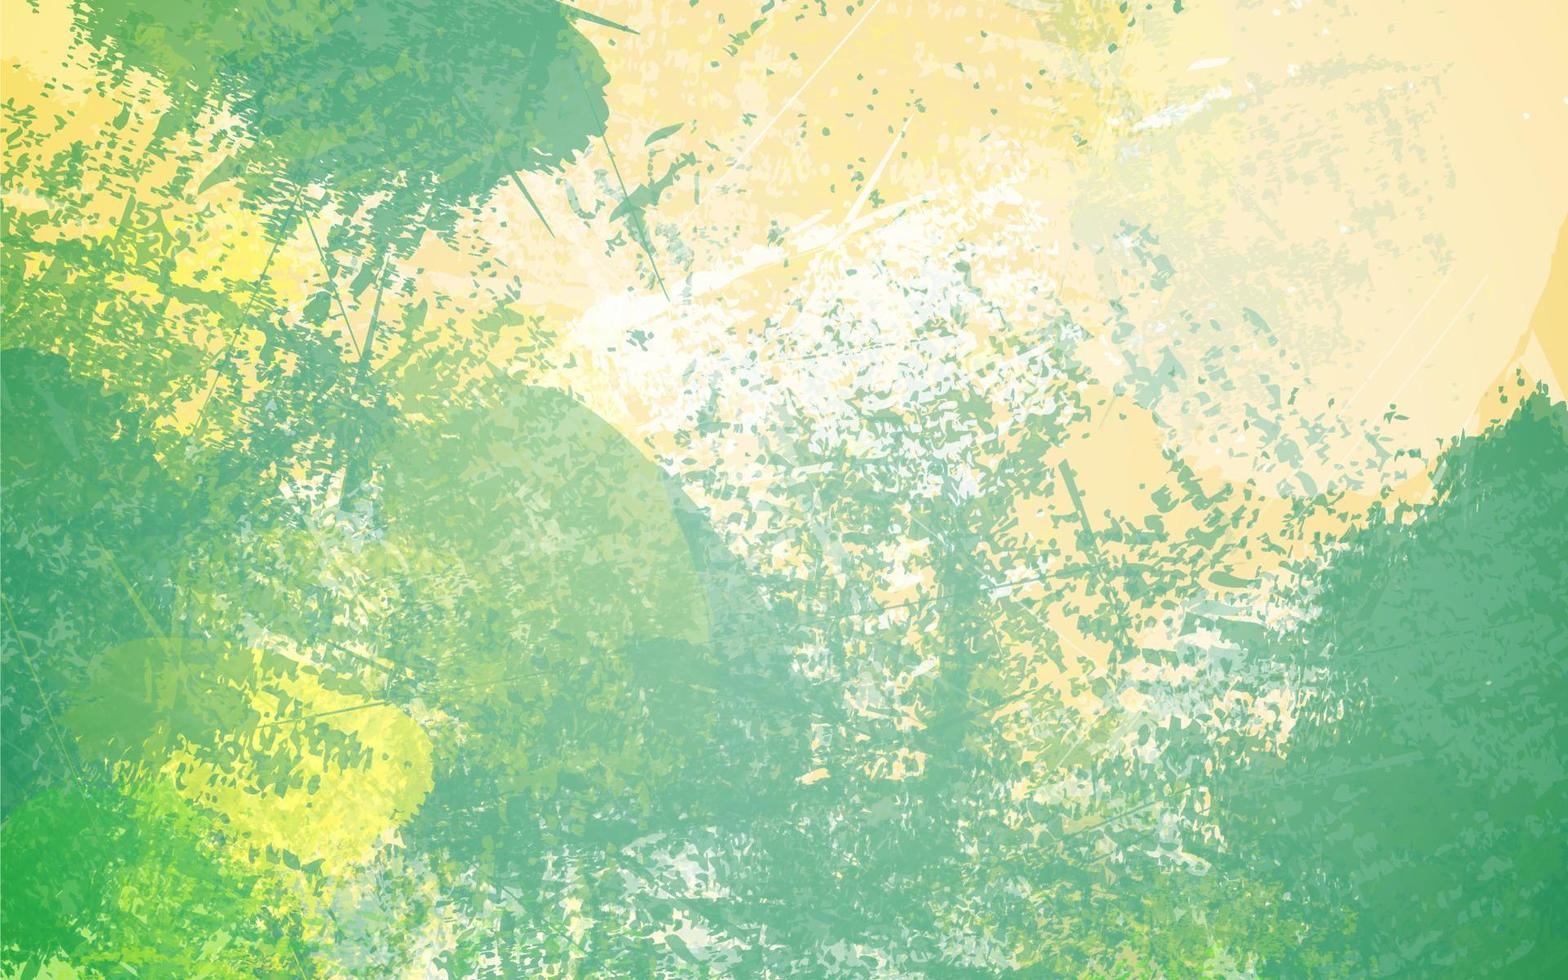 Abstract grunge texture green color background vector